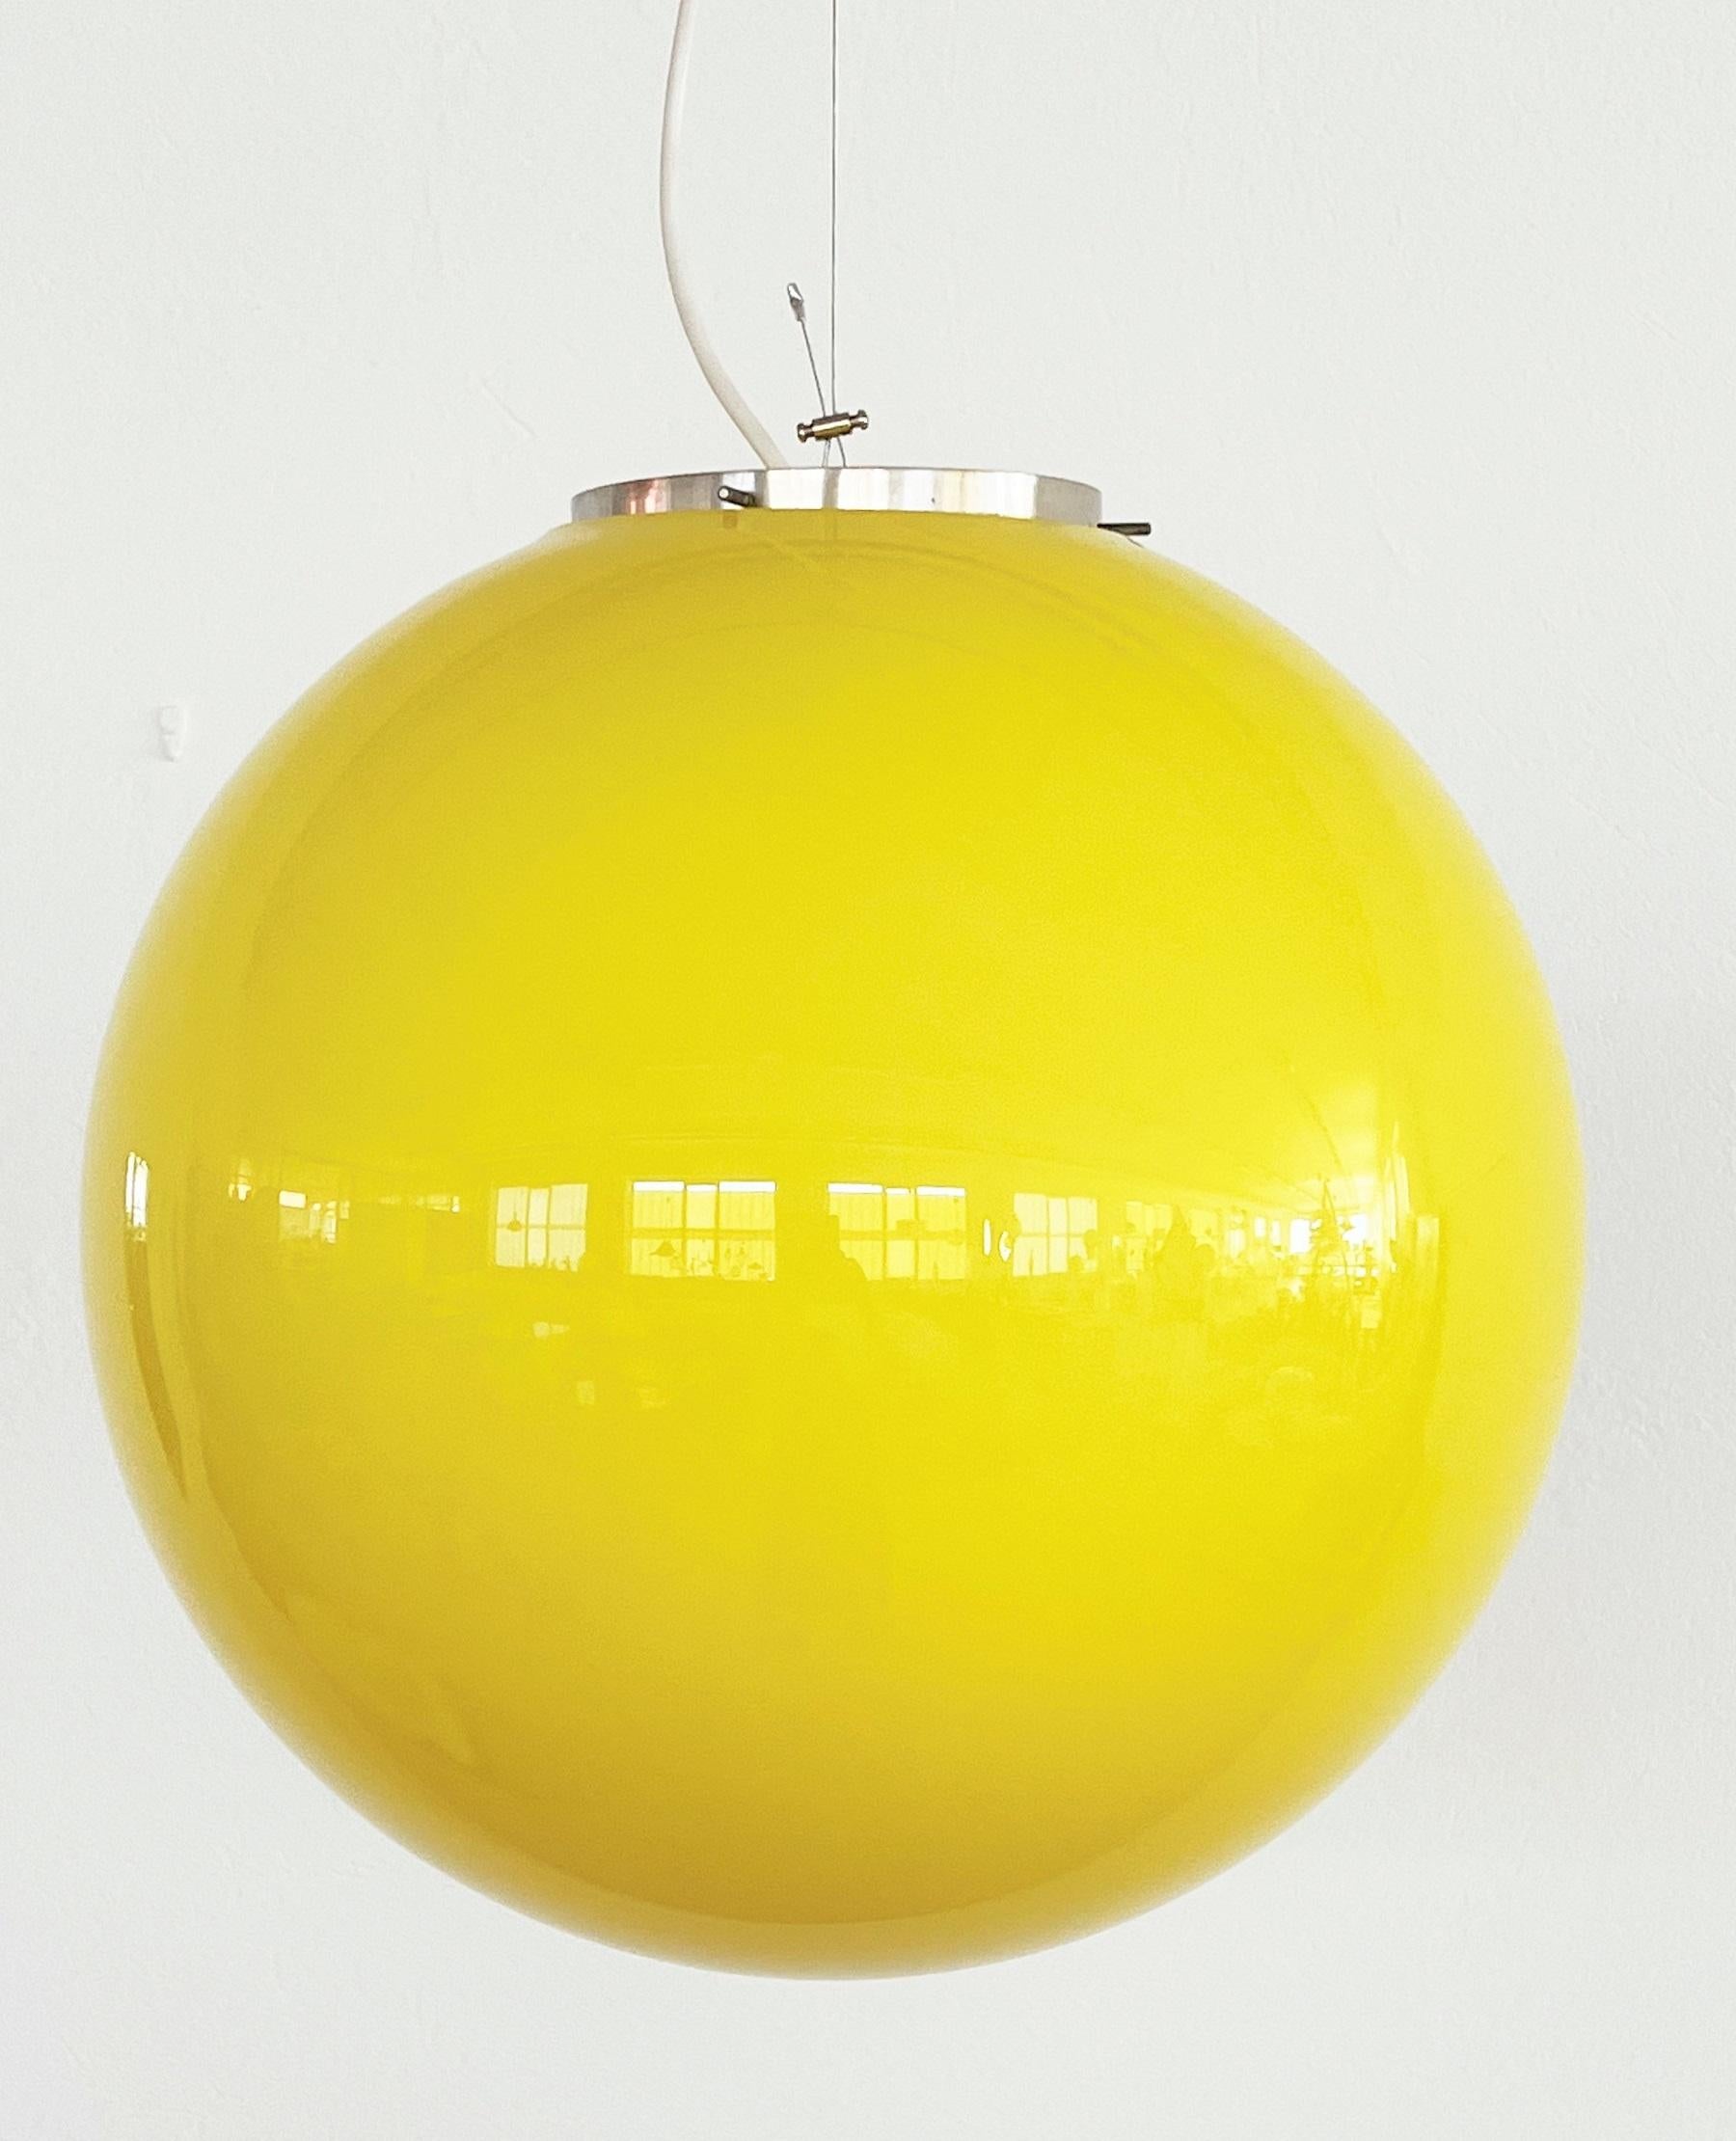 Beautiful Italian ceiling lamp of the 70s. Typical pop art style.
The large shiny Murano glass ball of high quality manufacture is in bright lemon yellow and in excellent condition, also the upper glass rim is flawless.
The suspension device of